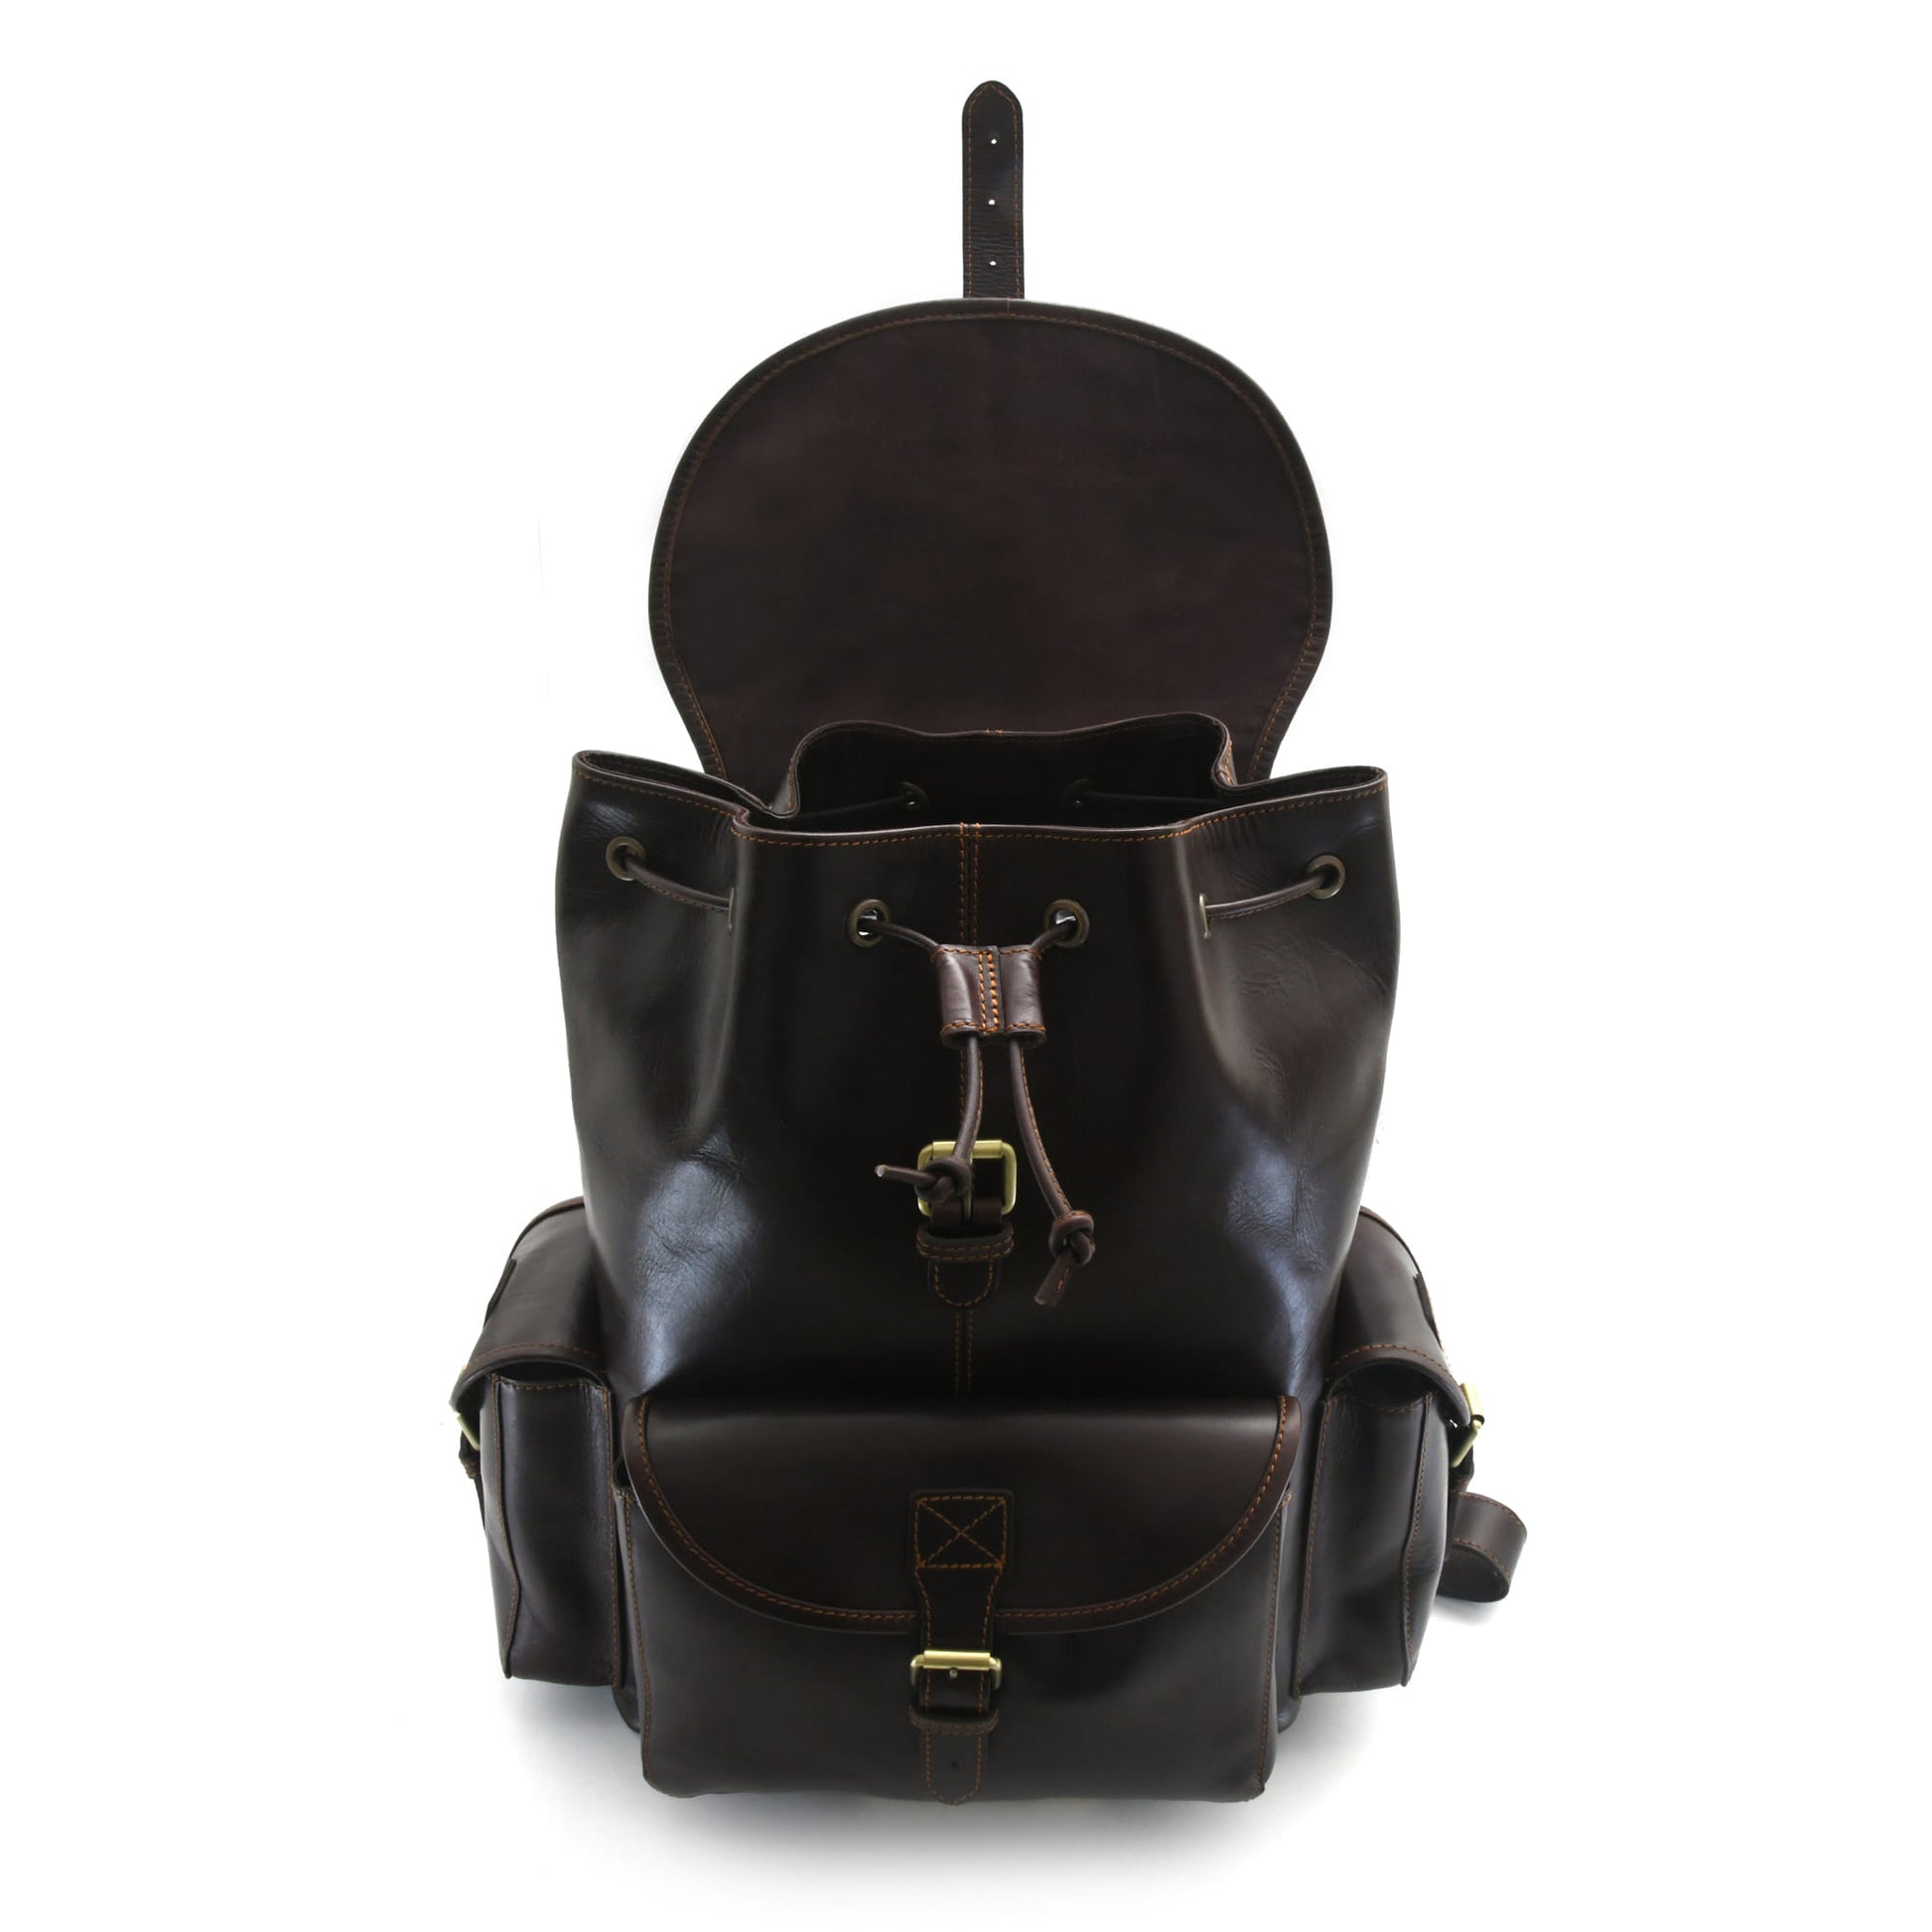 Style n Craft 392150 Backpack Large in Full Grain Dark Brown Leather - Front View with Open Flap Showing the Top Opening & Drawstring Closure